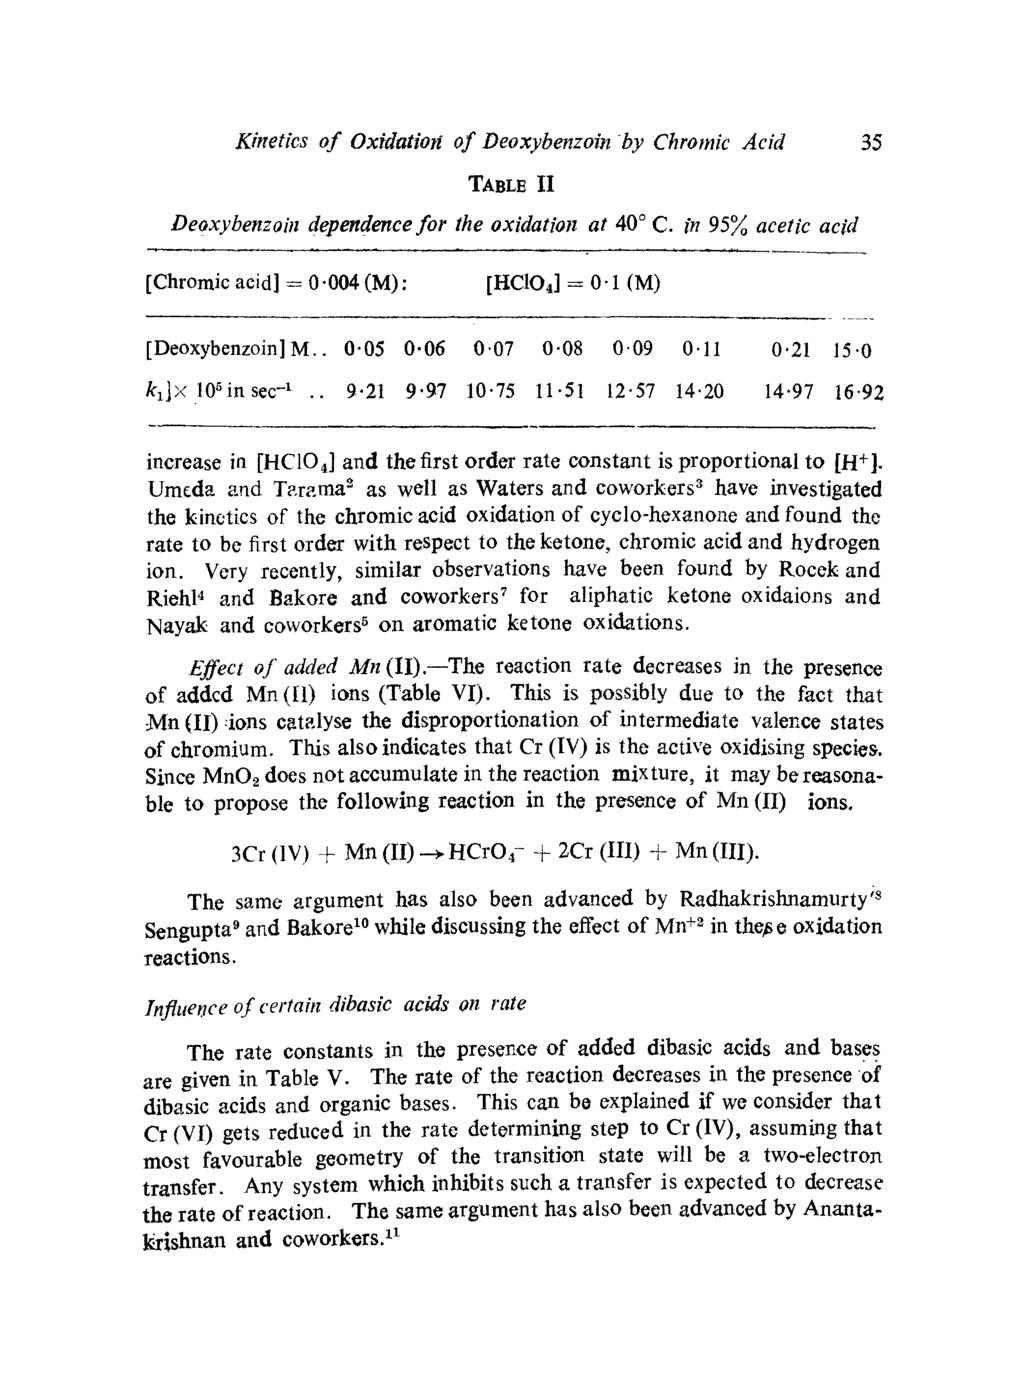 Kinetics of Oxidation of Deoxybenzoin by Chromic Acid 35 TABLE II Deoxybenzoin dependence for the oxidation at 40 C. in 95% acetic acid [Chromic acid] = 0.004 (M): [HC1O4] = 01(M) [Deoxybenzoin] M.. 0.05 0.